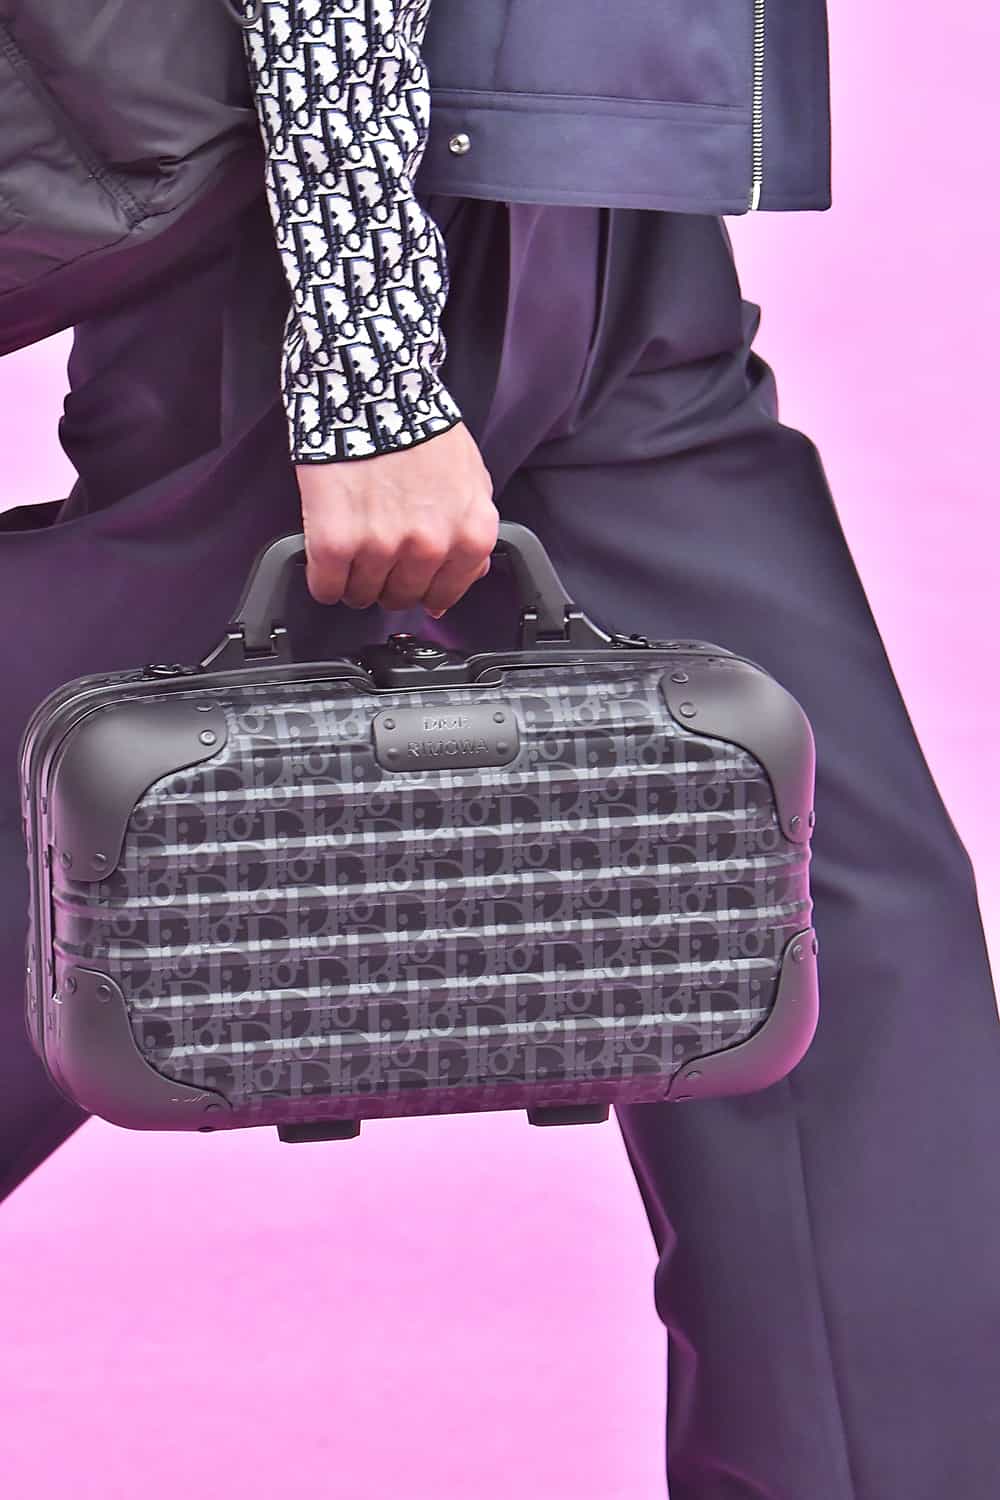 Dior Men's Spring/Summer 2019 Runway Bag Collection - Spotted Fashion